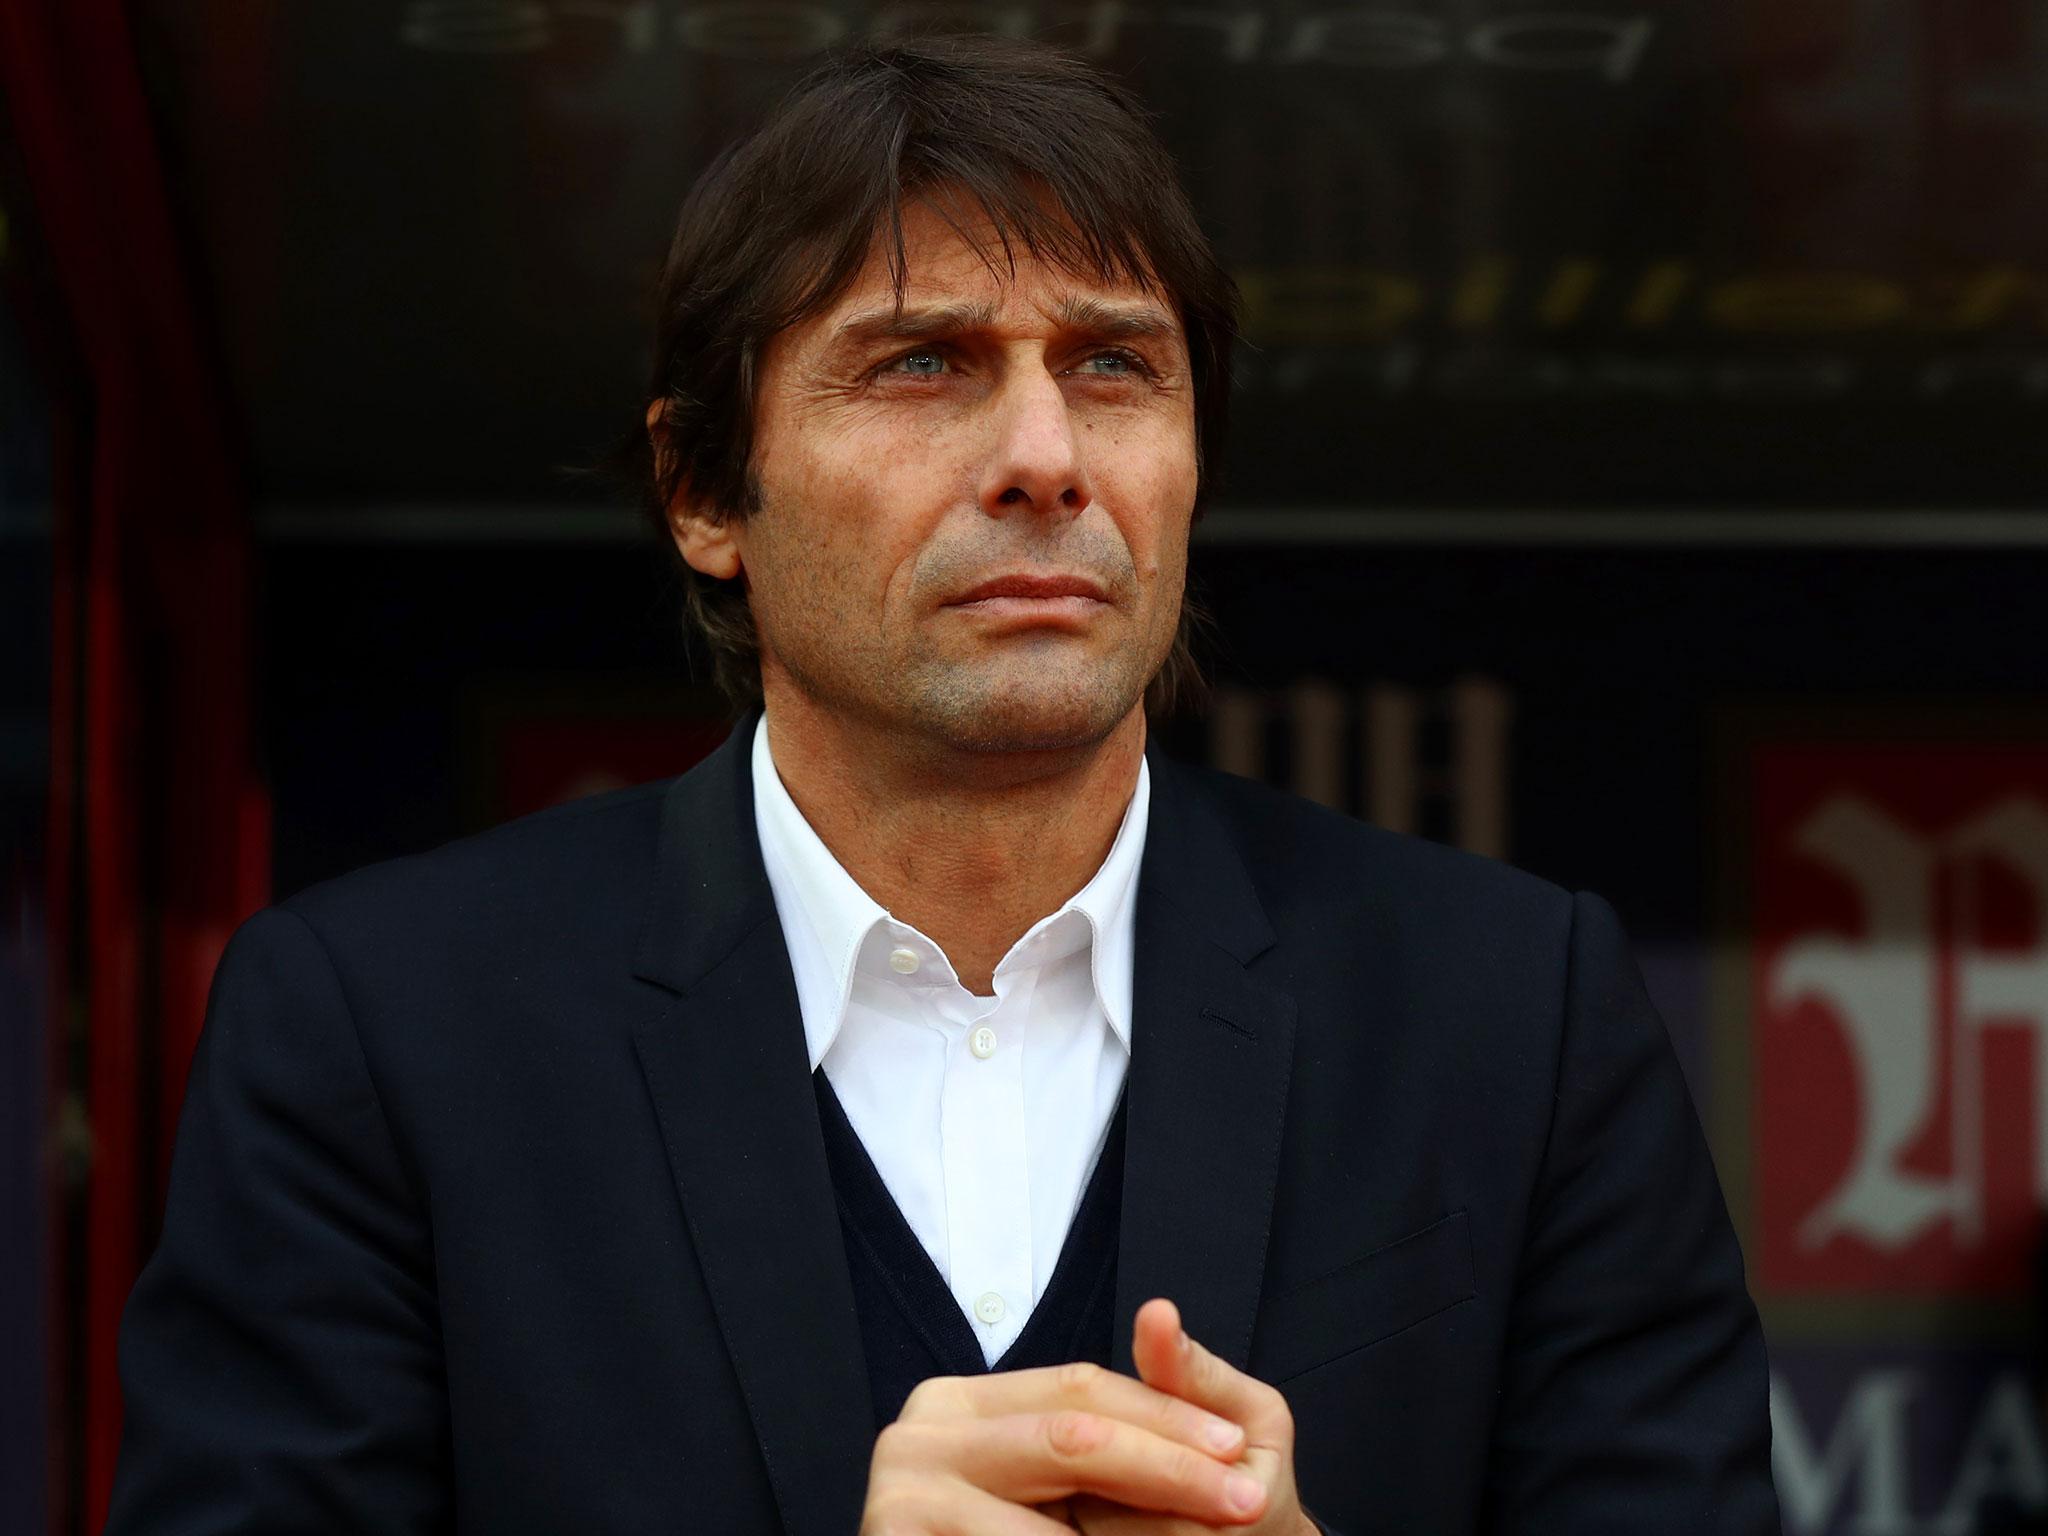 Antonio Conte is unsure what to expect as he heads into his first winter of Premier League fixtures